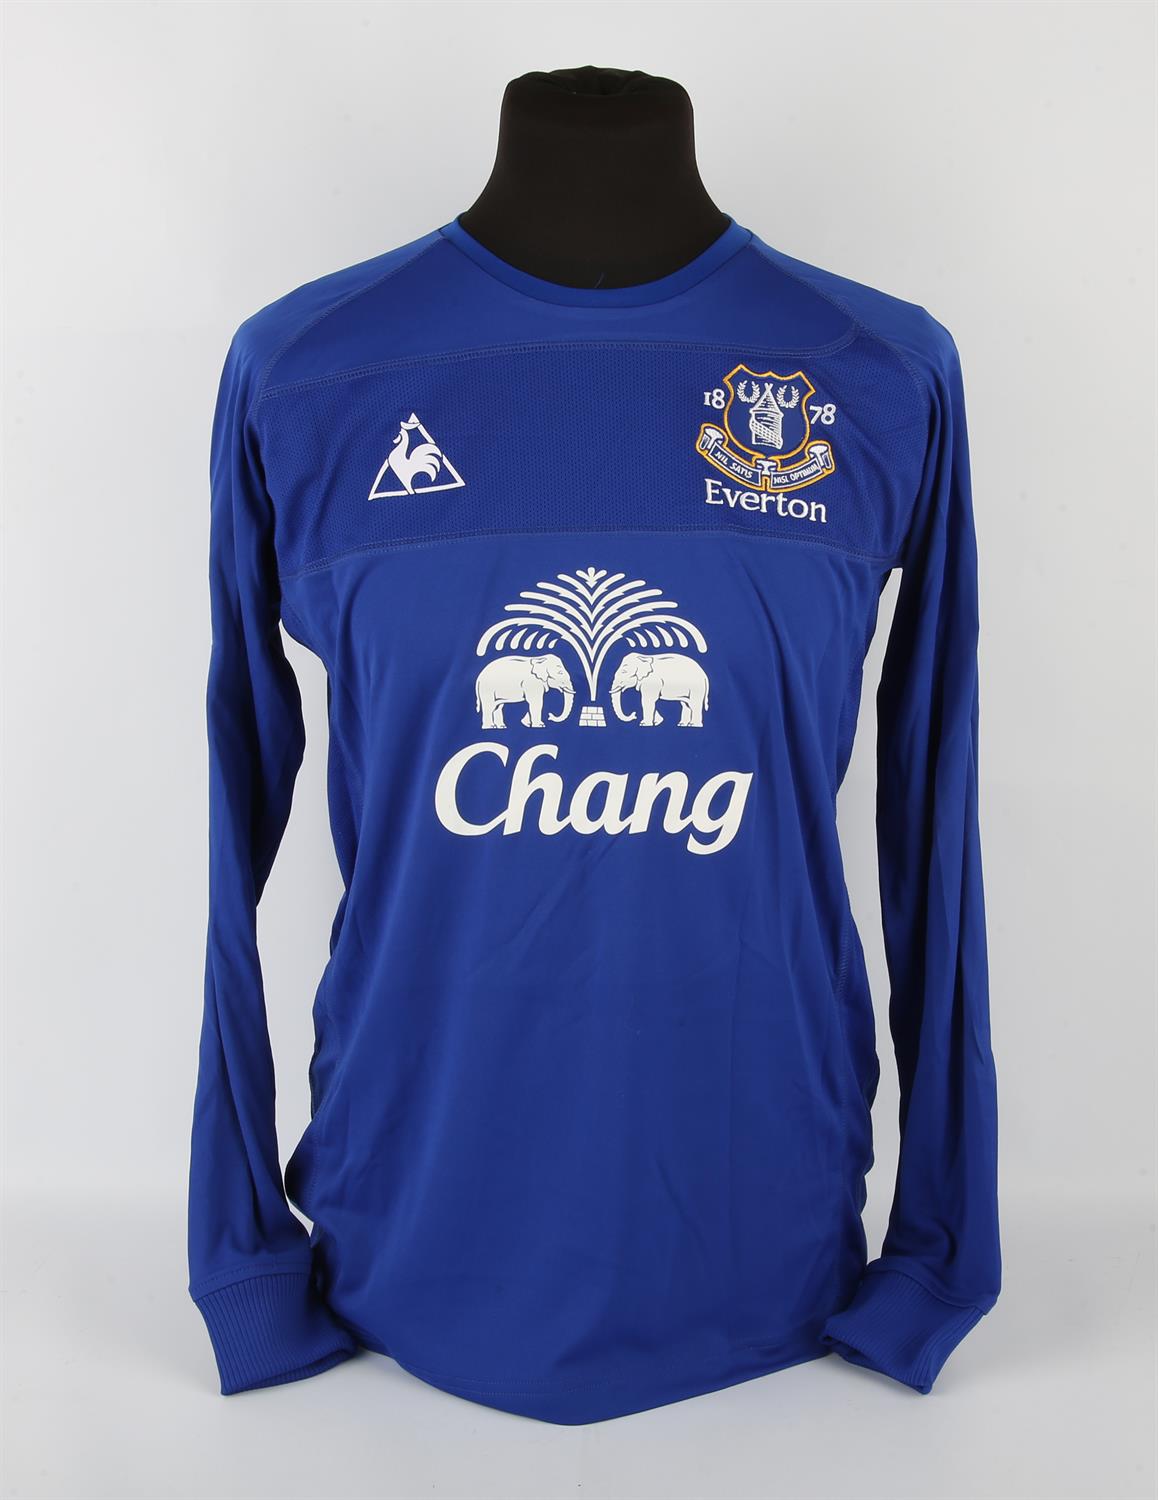 Everton Football club, Phil Neville (No.18 - signed on rear) Premier Season shirt from 2010-2011, - Image 2 of 2